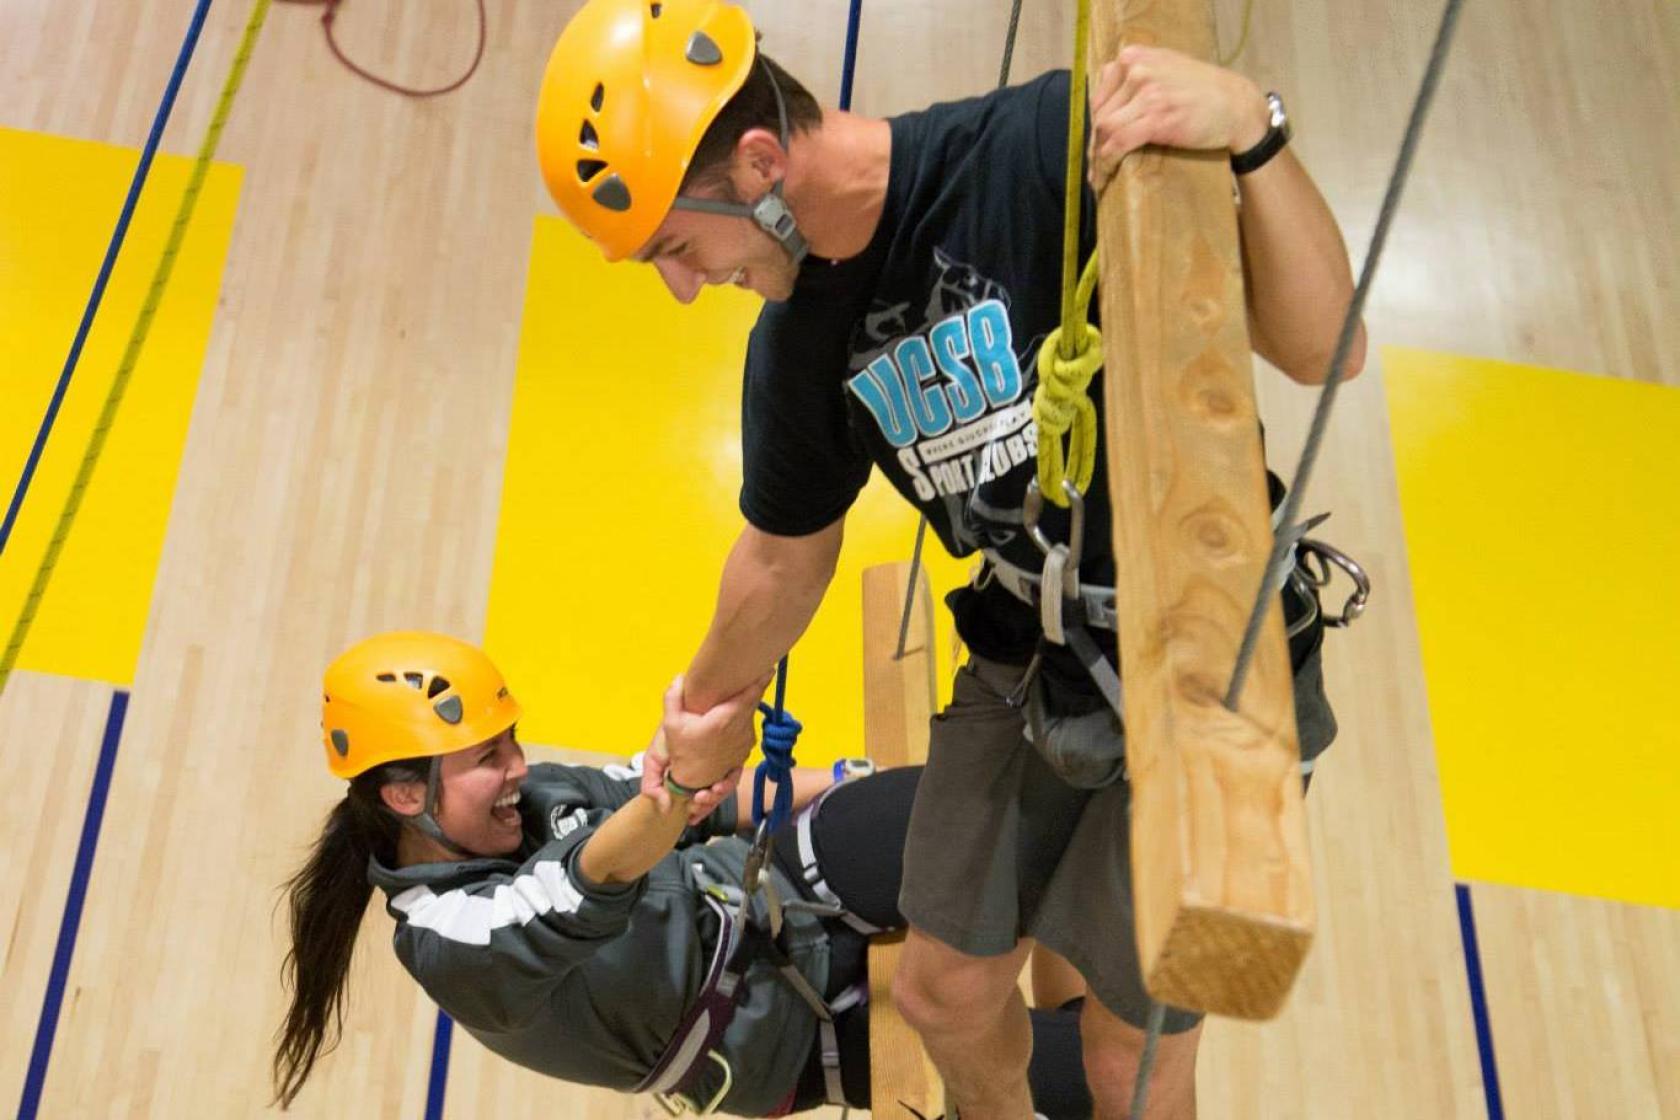 Two people climbing up a ropes course.